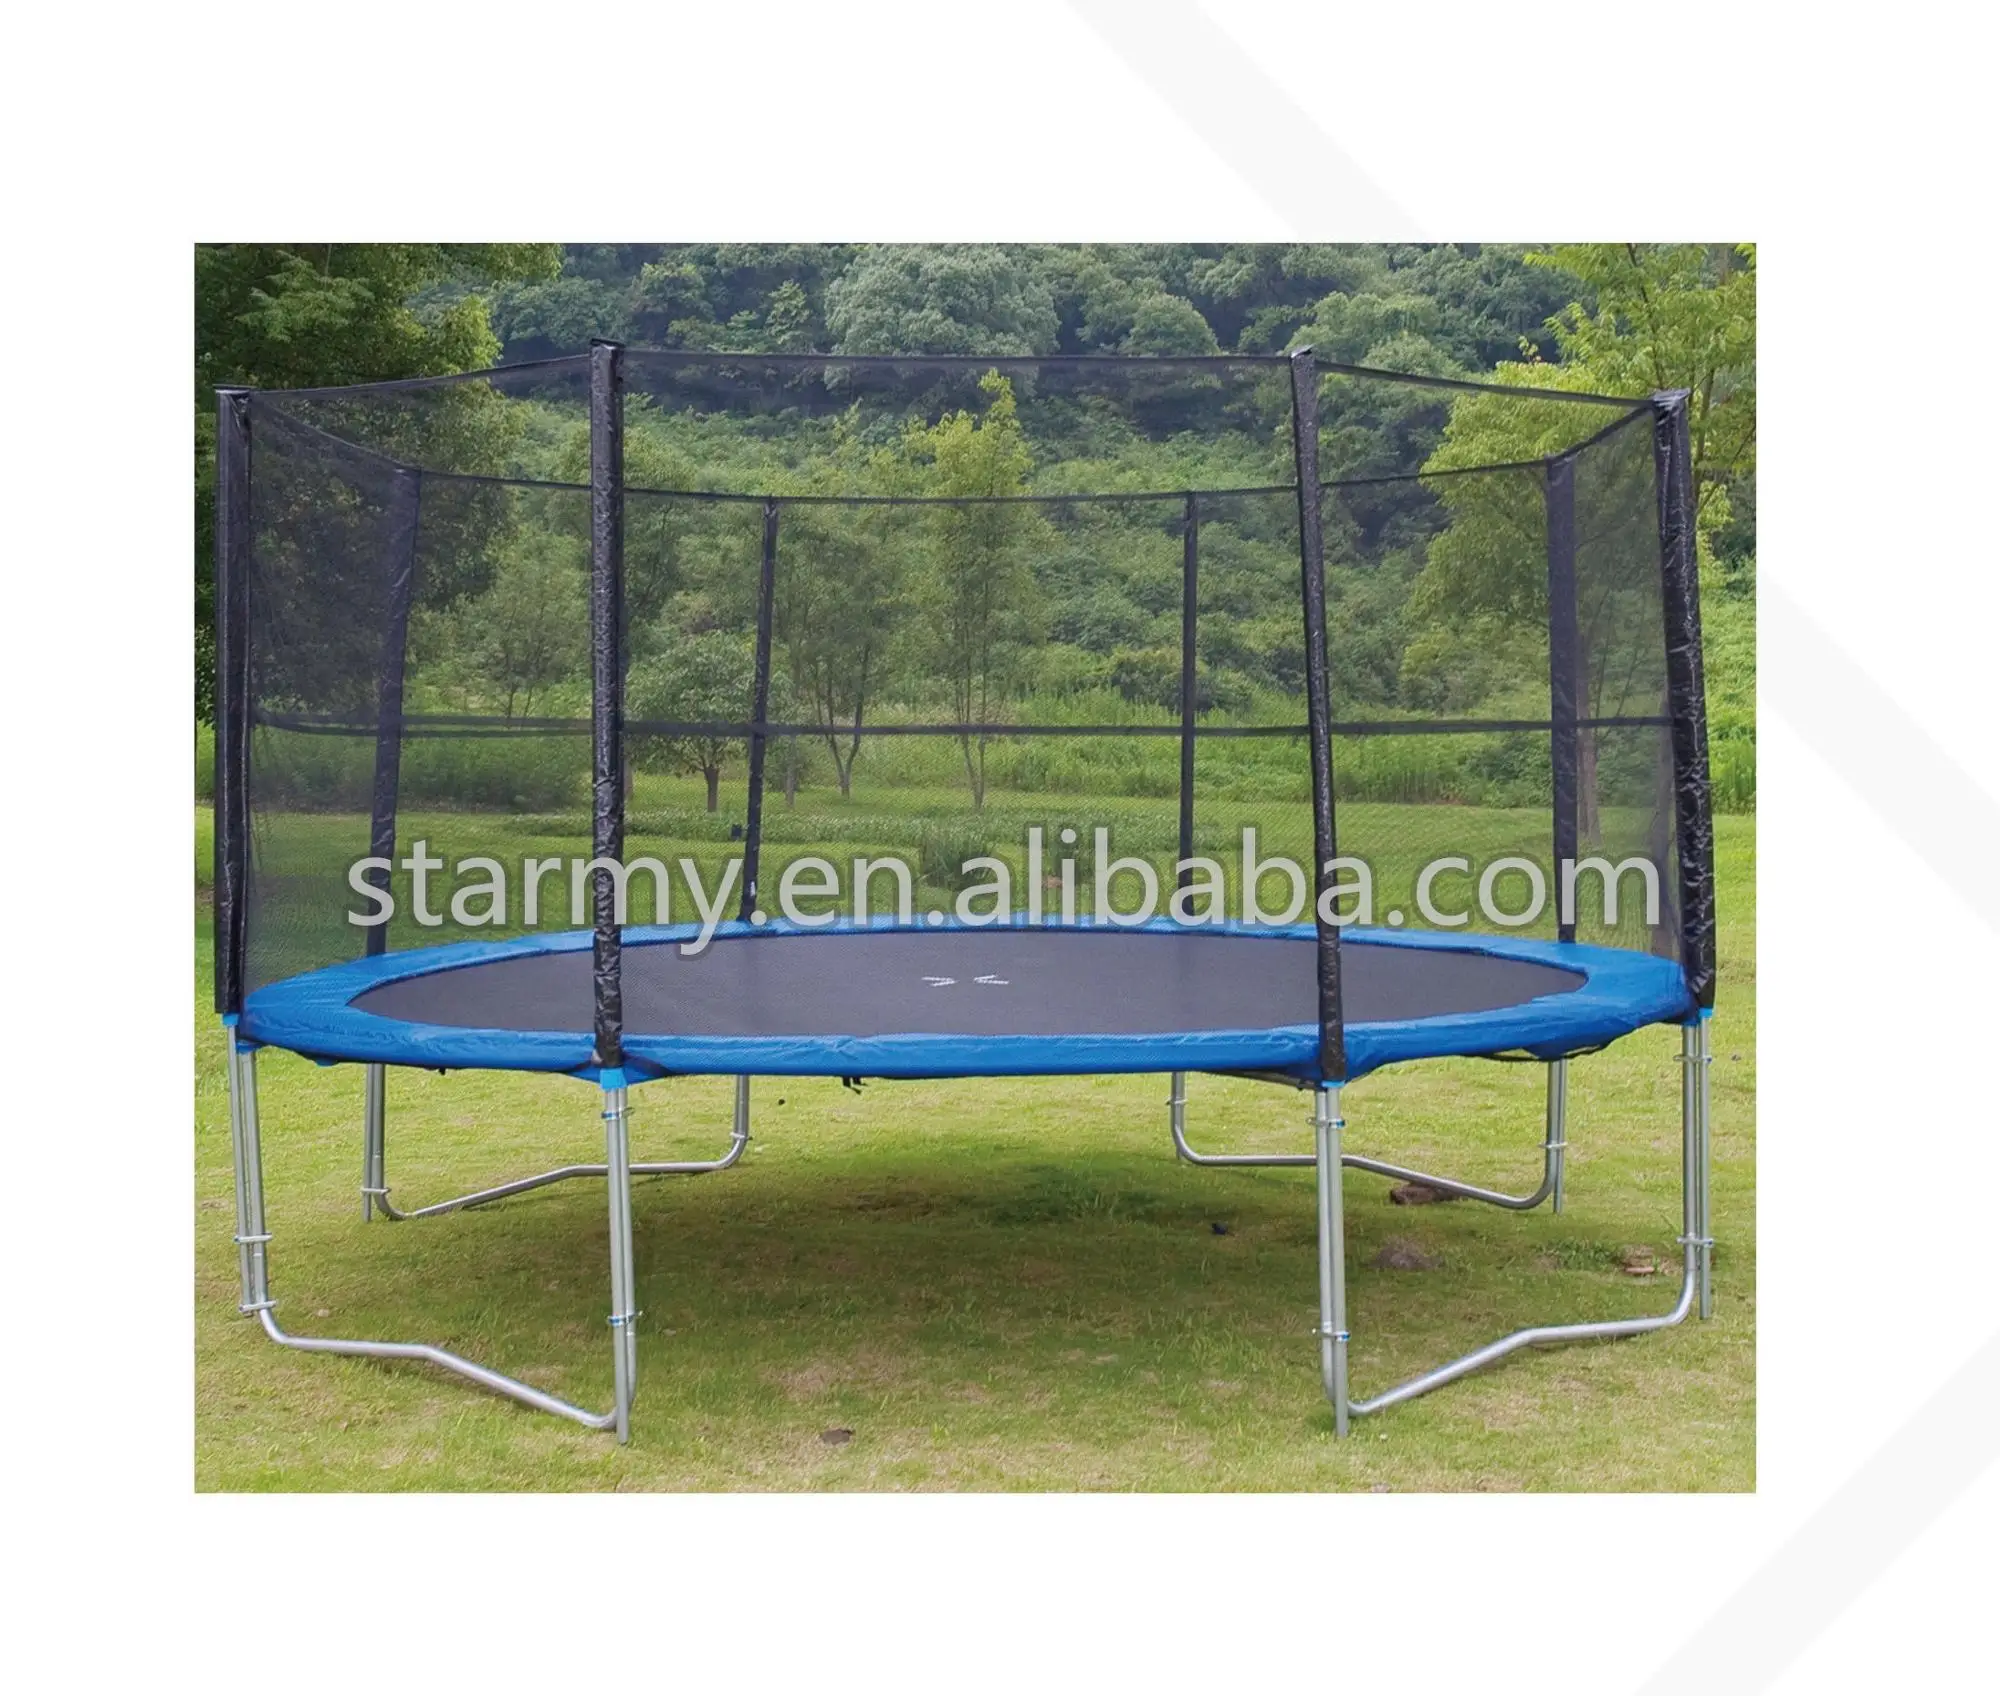 Trampoline With Safety Net Good Quality New Design Trampoline 3 Meter - Buy Large Trampolines With Foam Pit,15ft Trampoline With Safety Net,Folding Trampoline 16ft Product on Alibaba.com